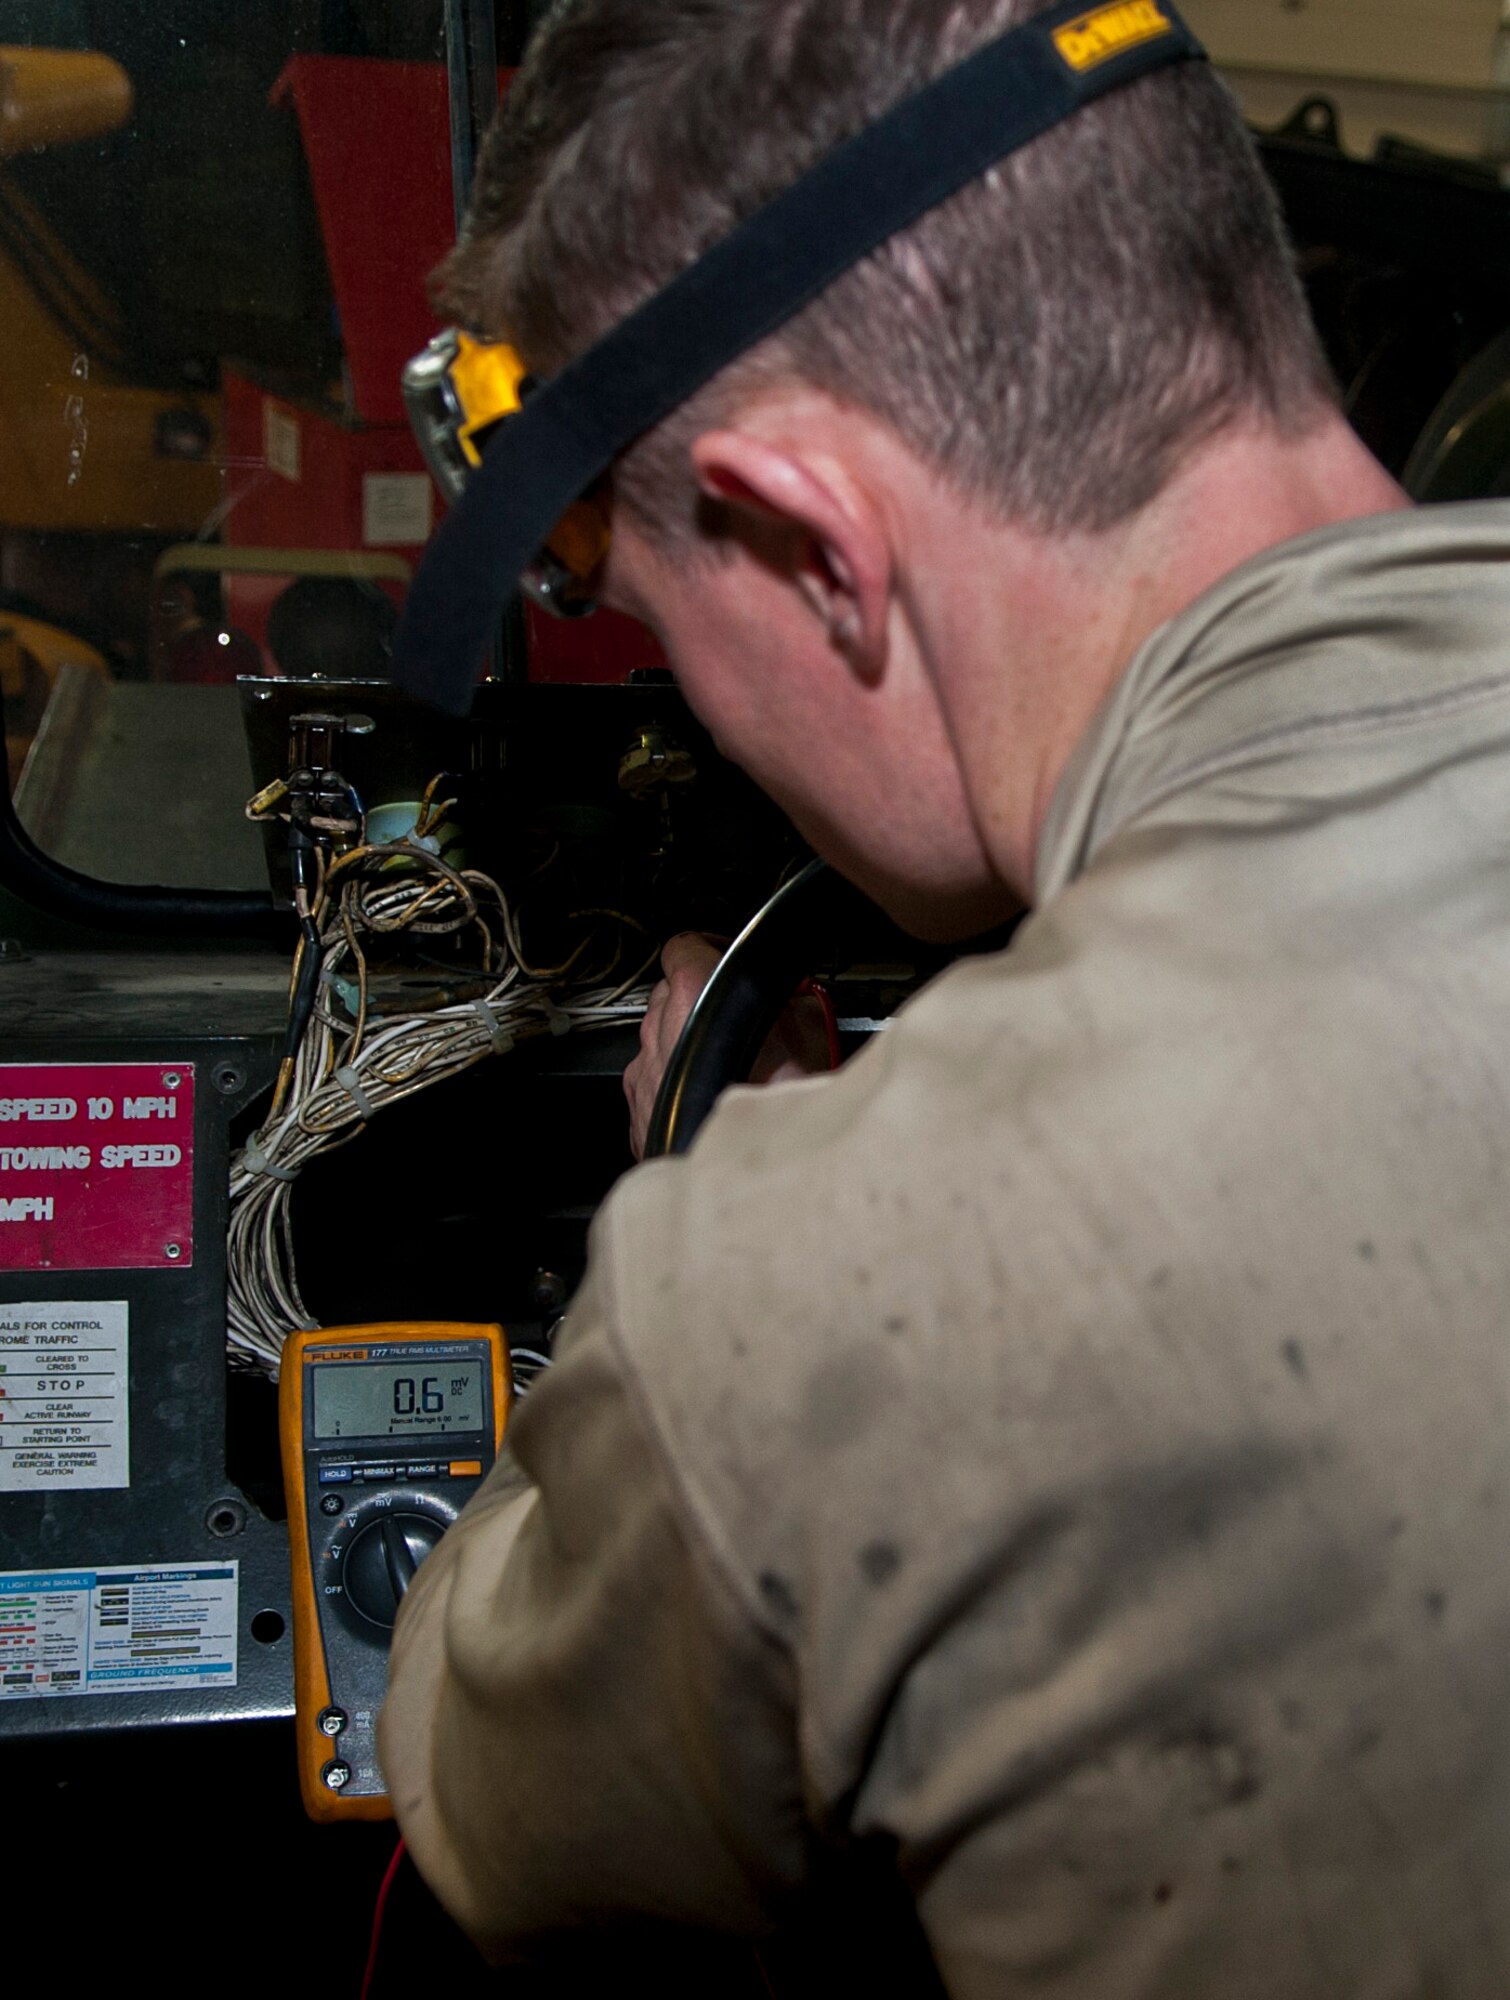 Airman 1st Class Brennan Walley, 5th Logistics Readiness Squadron vehicle maintenance technician, tests an electrical circuit at Minot Air Force Base, N.D., Dec. 14, 2016. Airmen in the 5th LRS special purpose shop are responsible for servicing all Minot AFB vehicles to ensure base operations continue running smoothly. (U.S. Air Force photo/Airman 1st Class Jonathan McElderry)